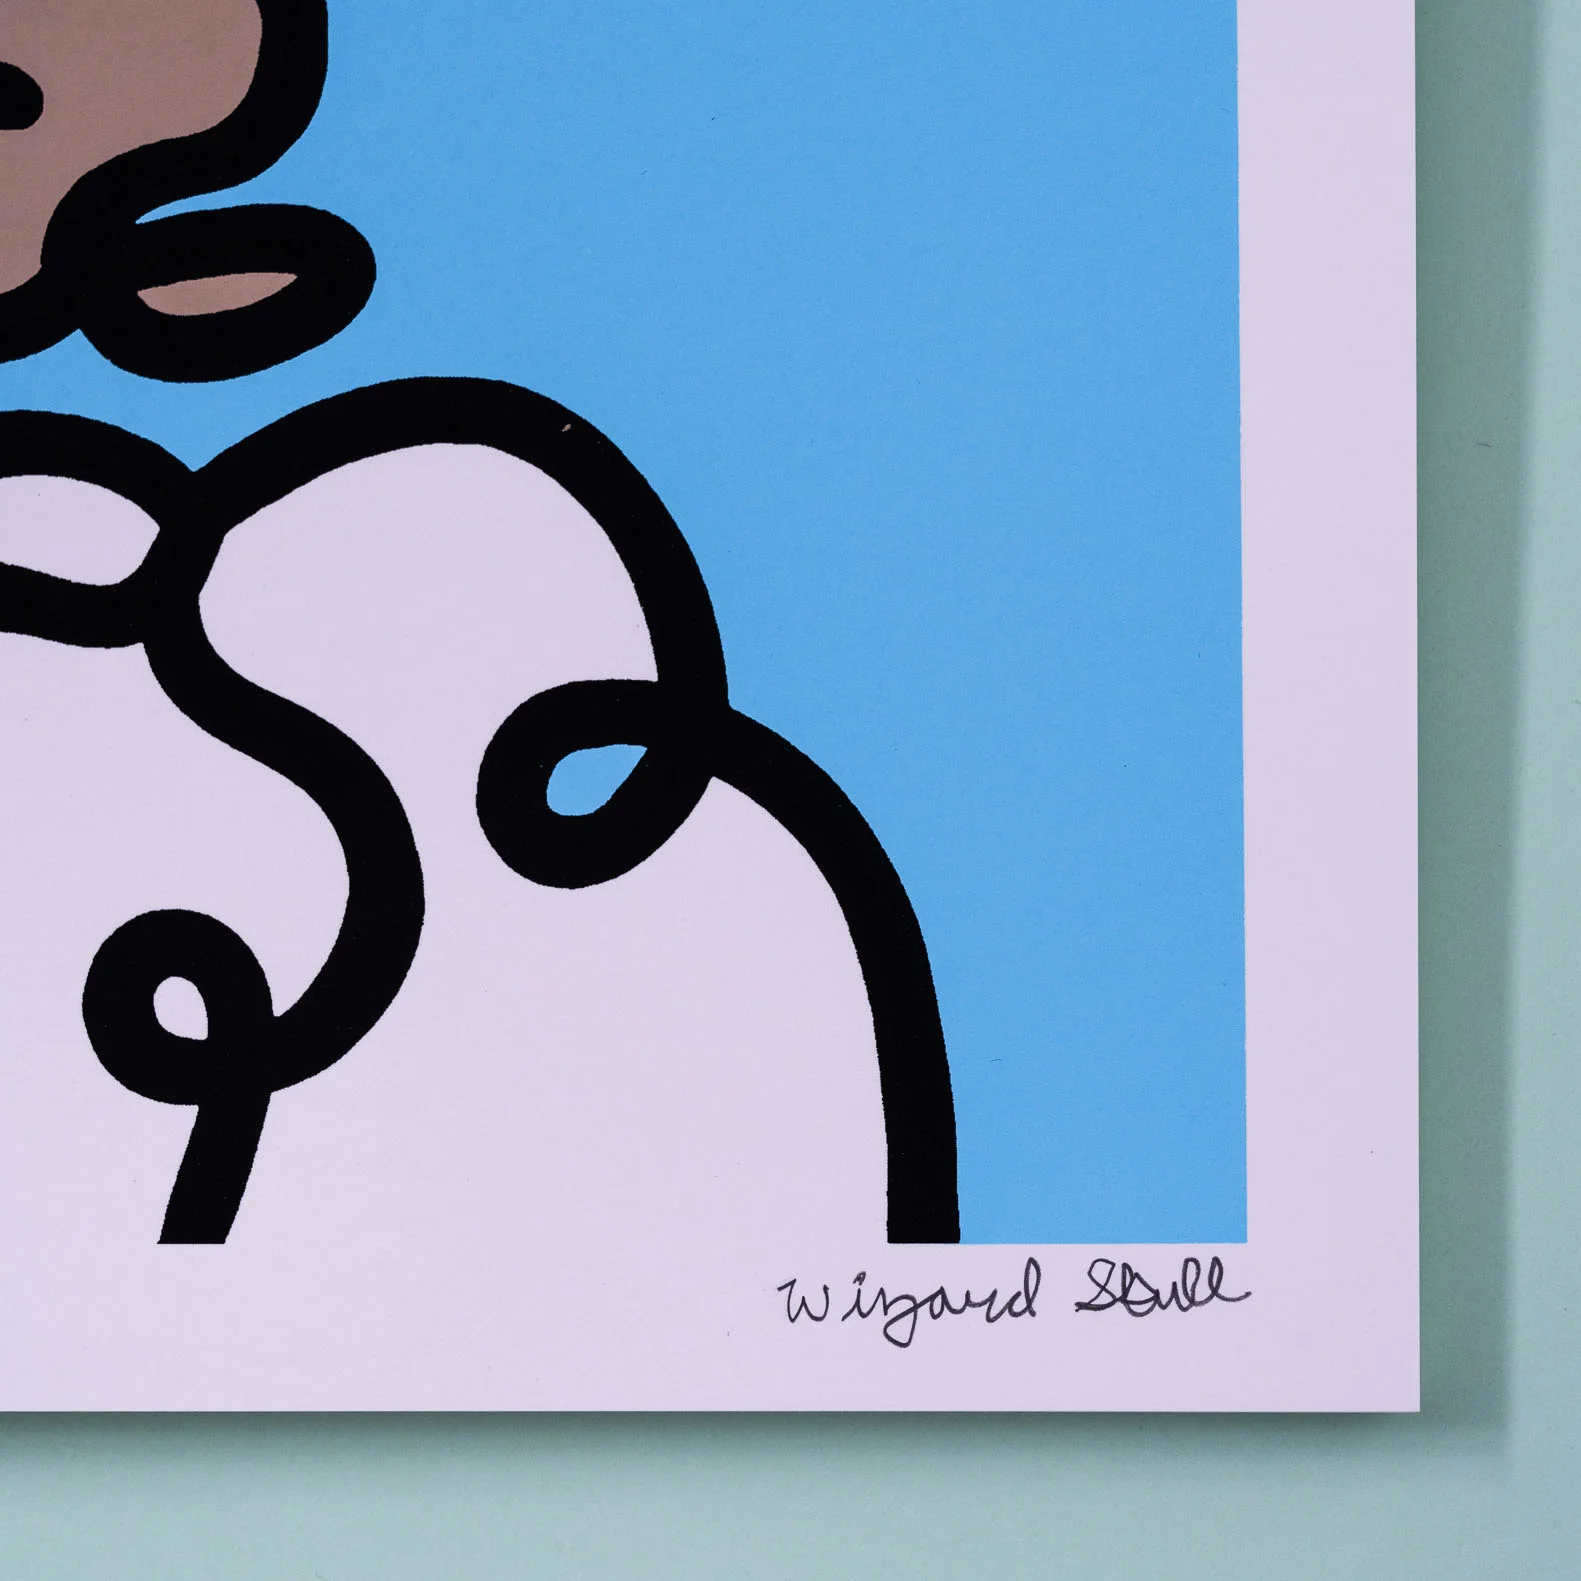 Detail and artist Wizard Skull signature of Simpsons Homer with wobbly lines as a screen print edition